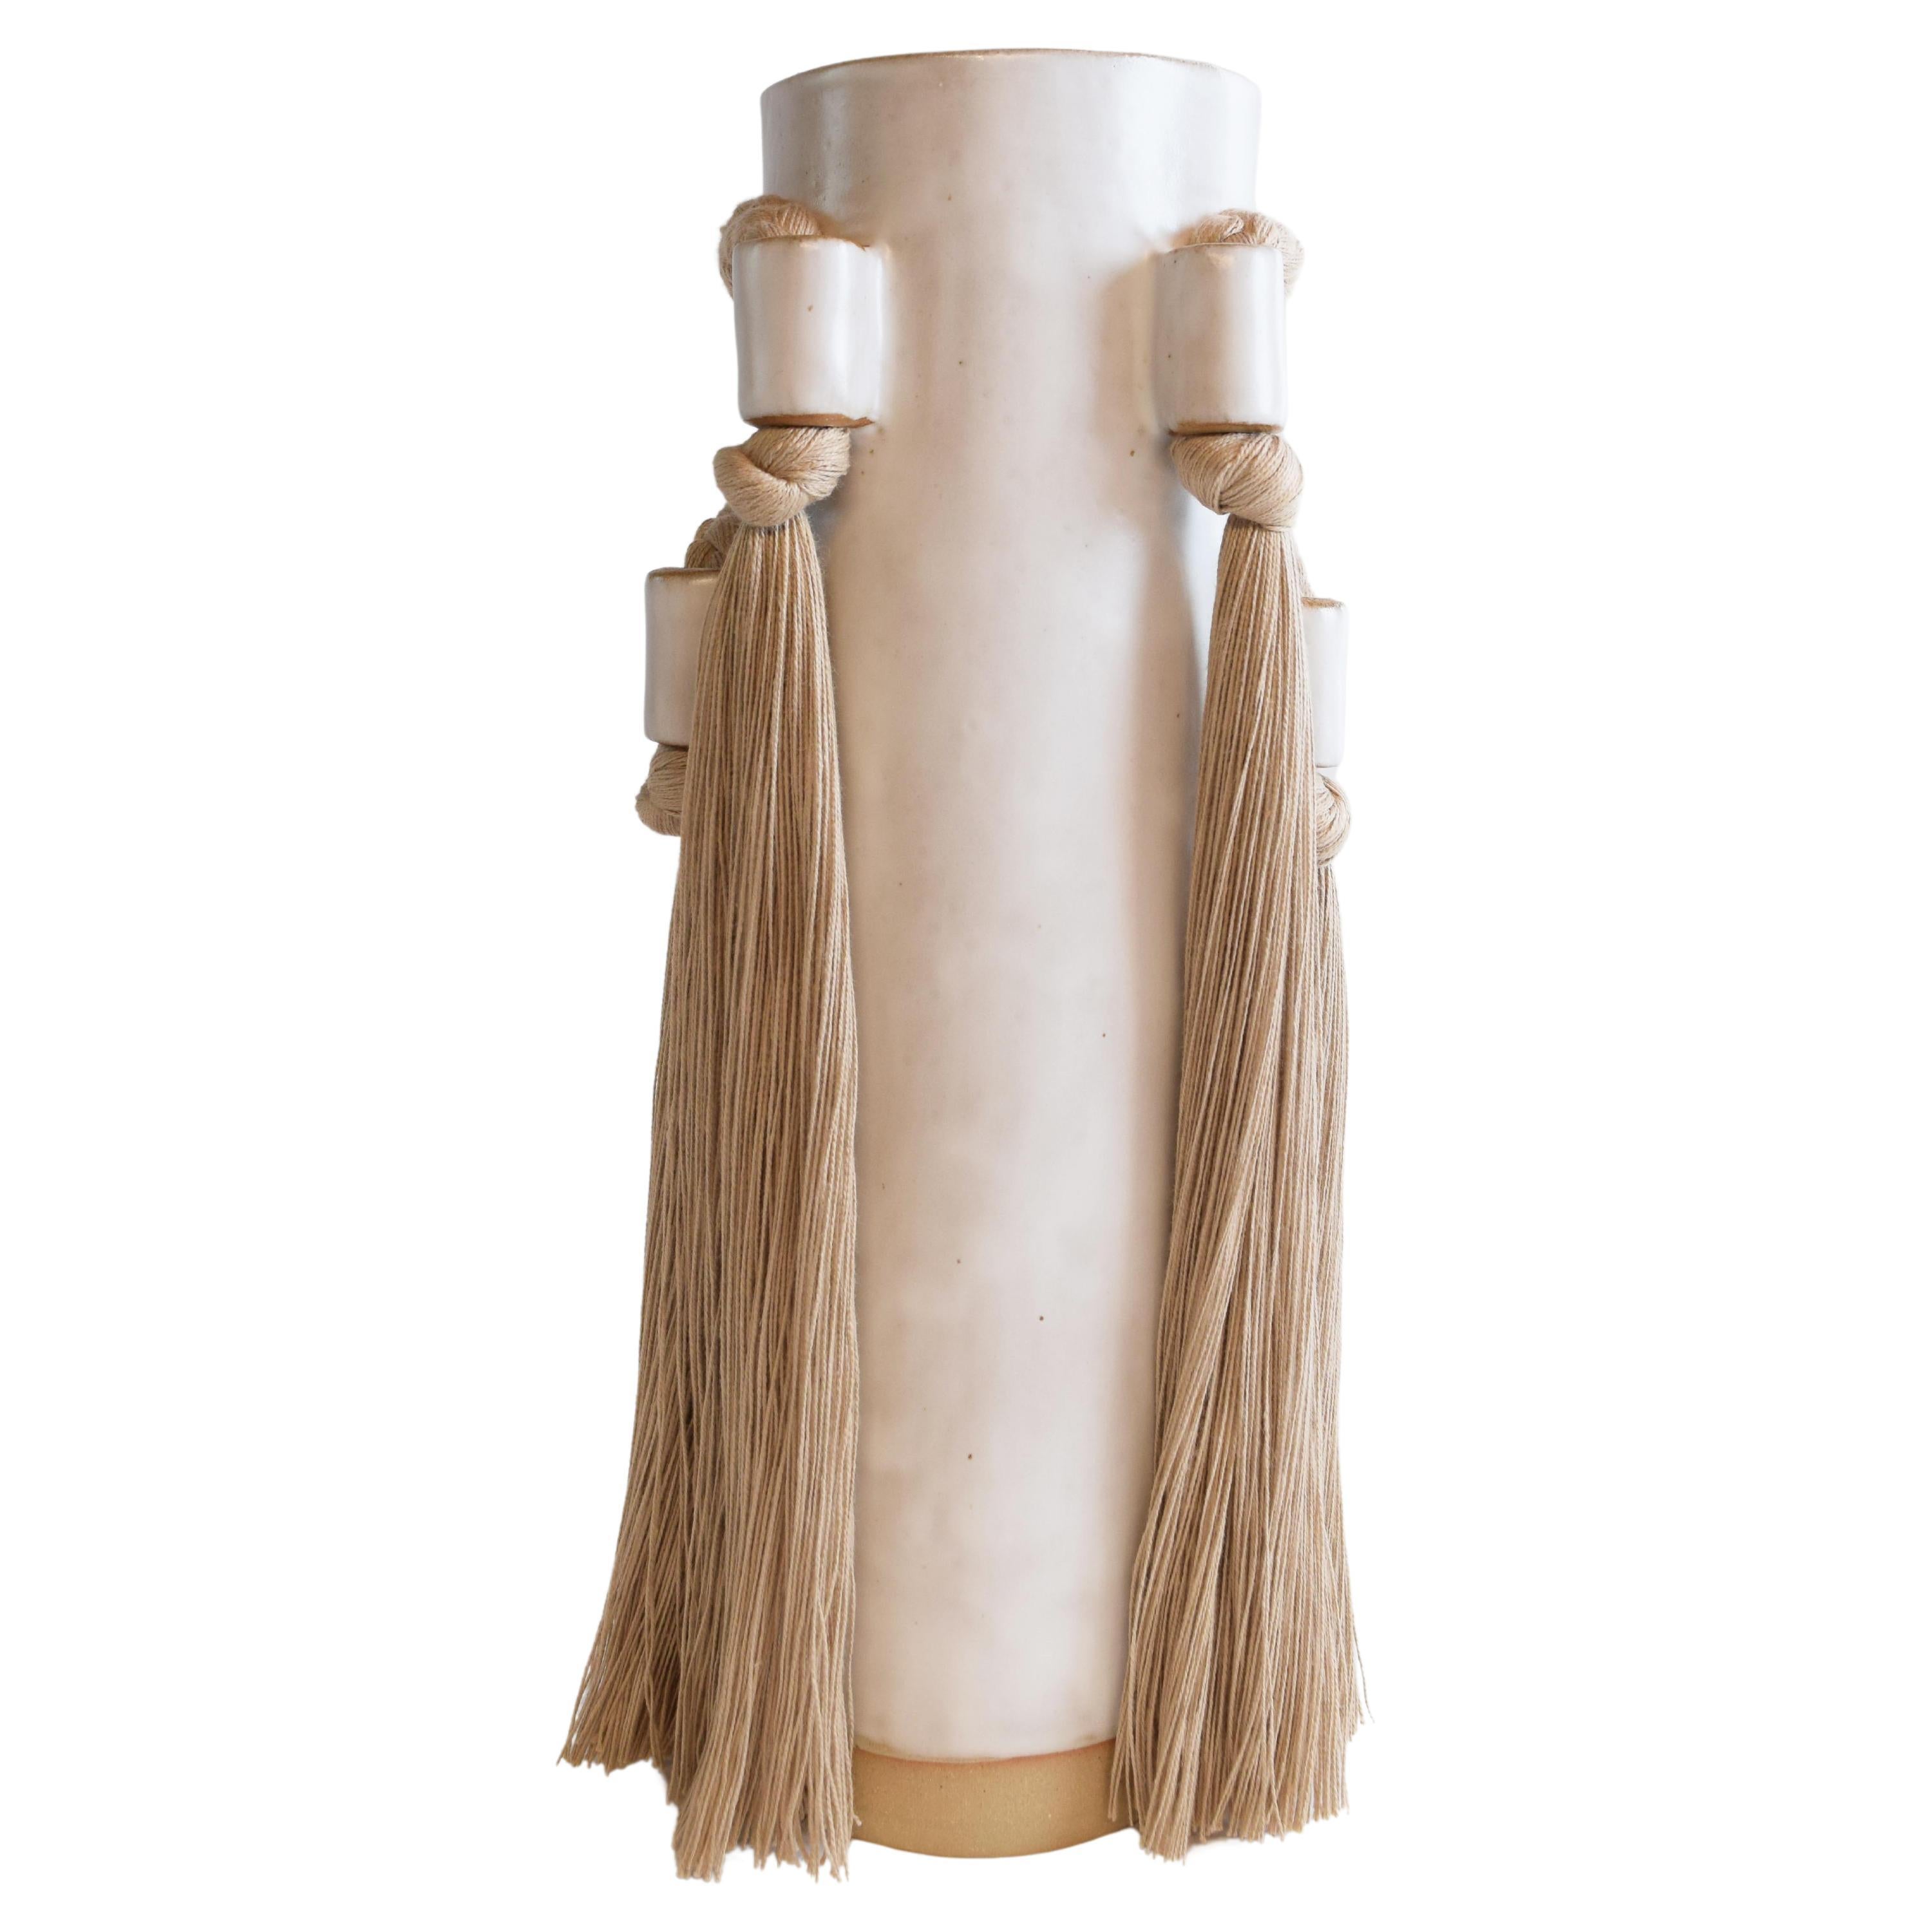 Handmade Ceramic Vase #735 in White with Tan Cotton Braided & Fringe Details For Sale